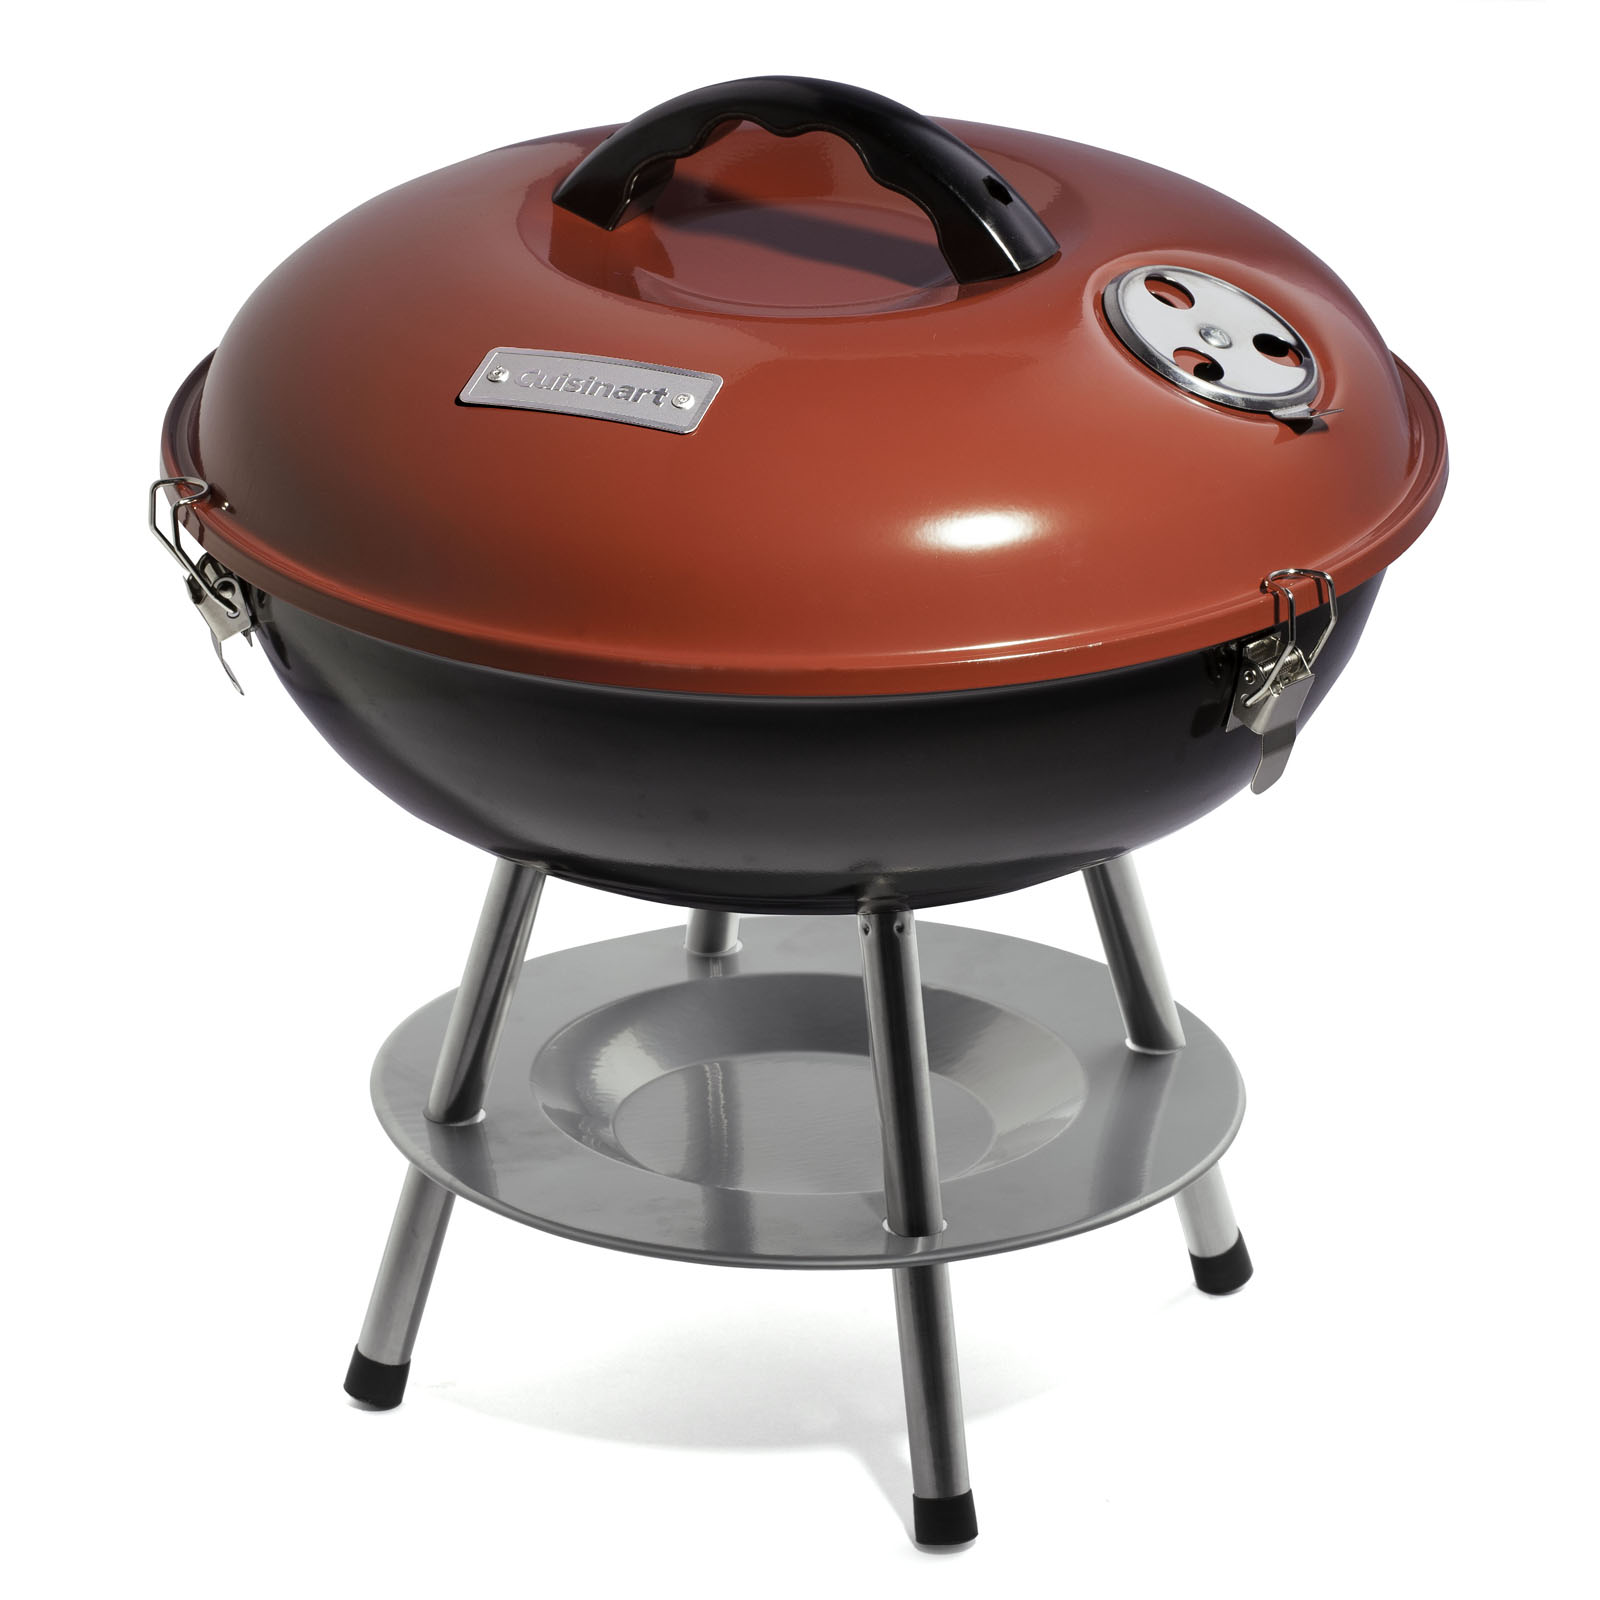 Cuisinart 14" Portable Charcoal Grill - image 1 of 3